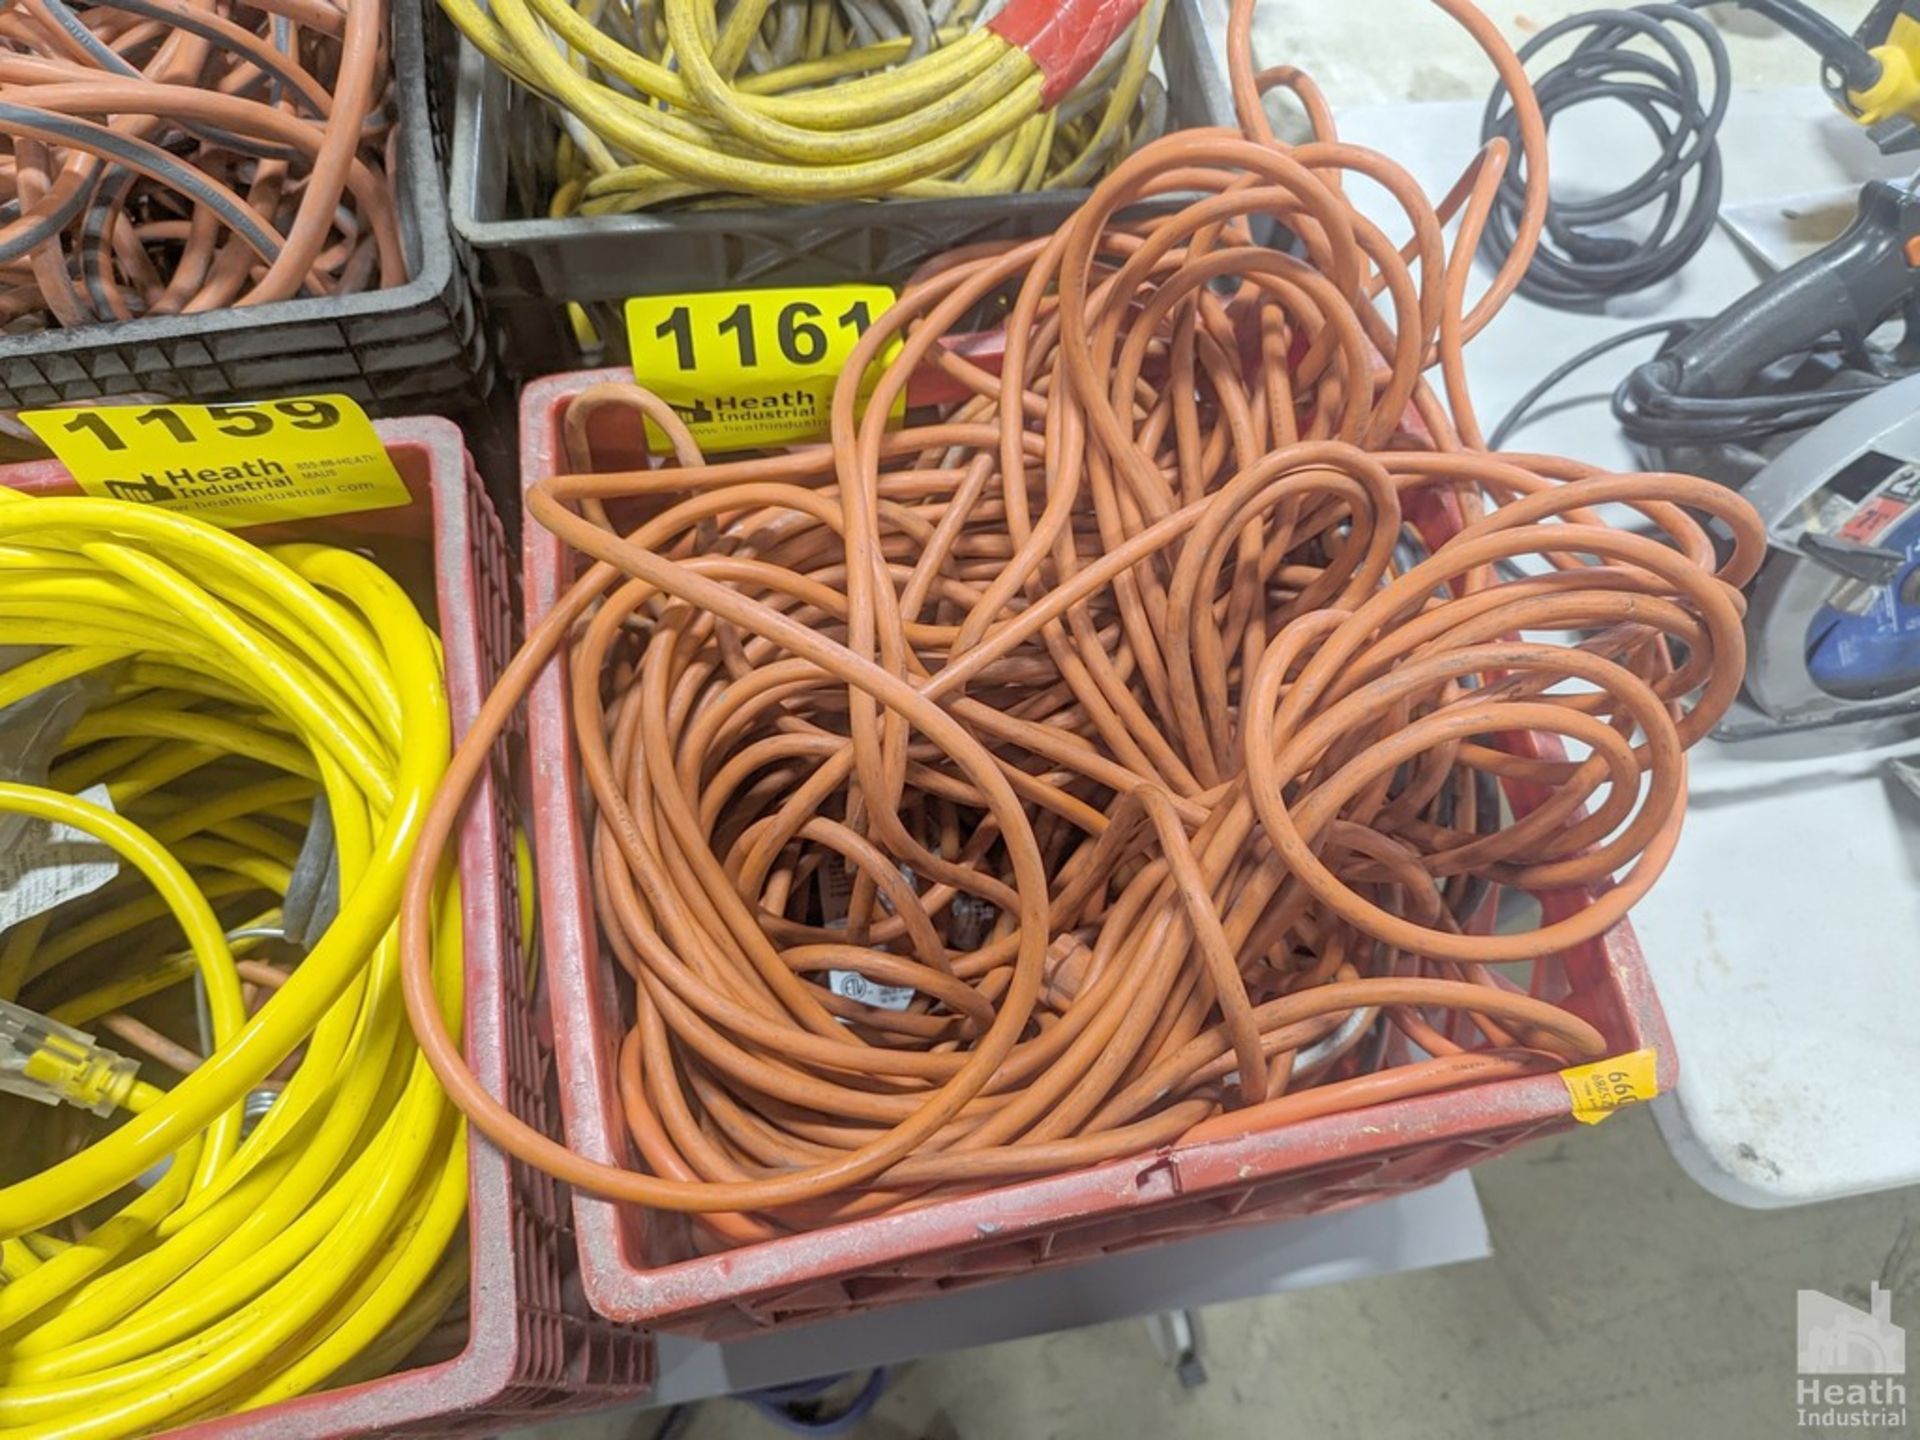 HEAVY DUTY EXTENSION CORDS IN TOTE